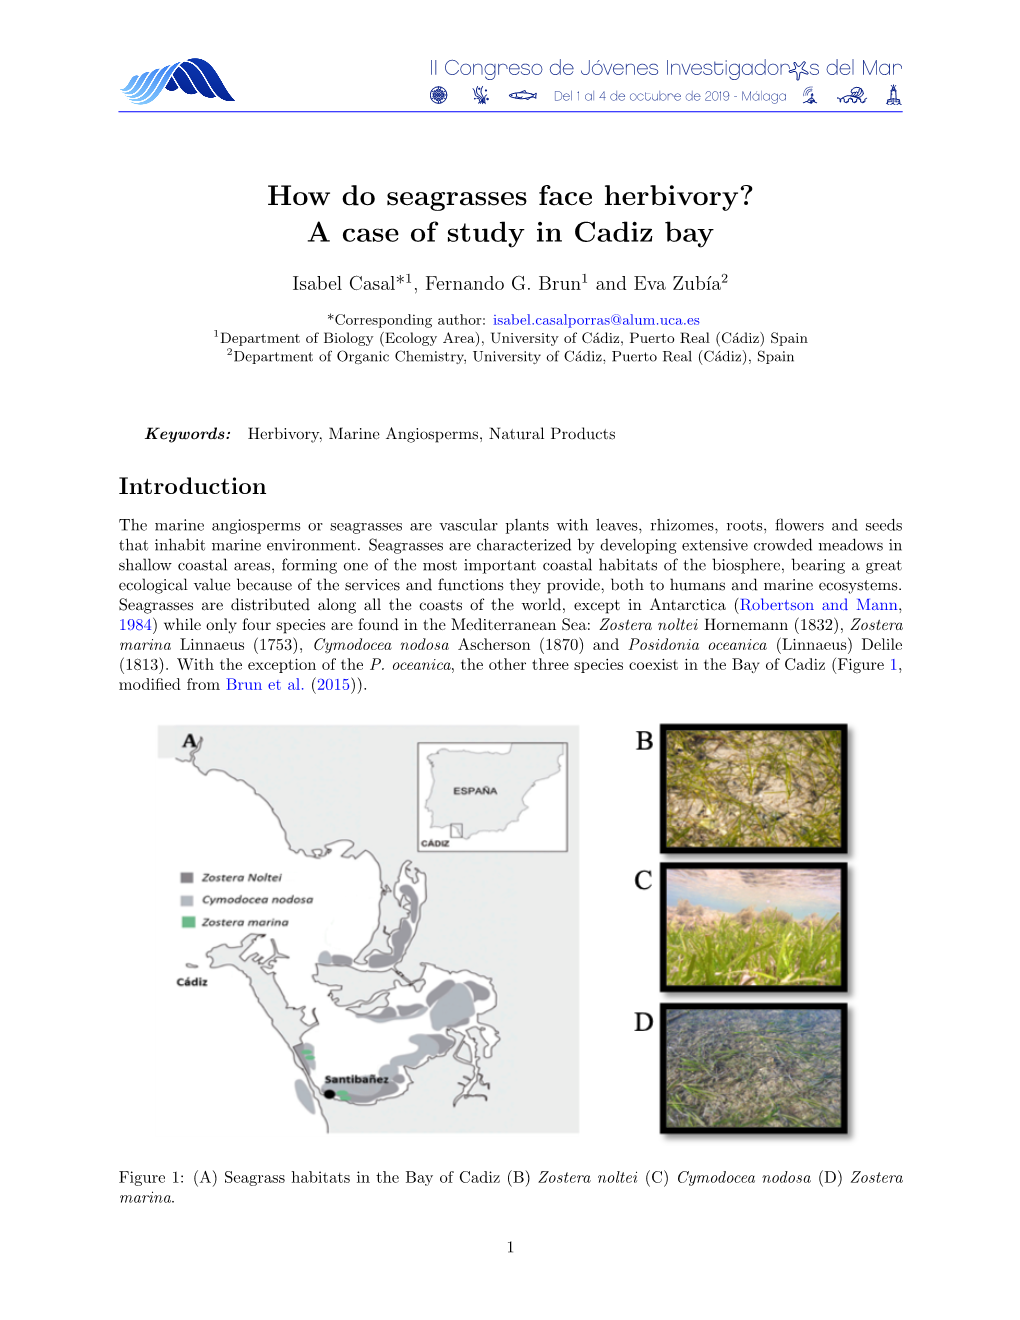 How Do Seagrasses Face Herbivory? a Case of Study in Cadiz Bay